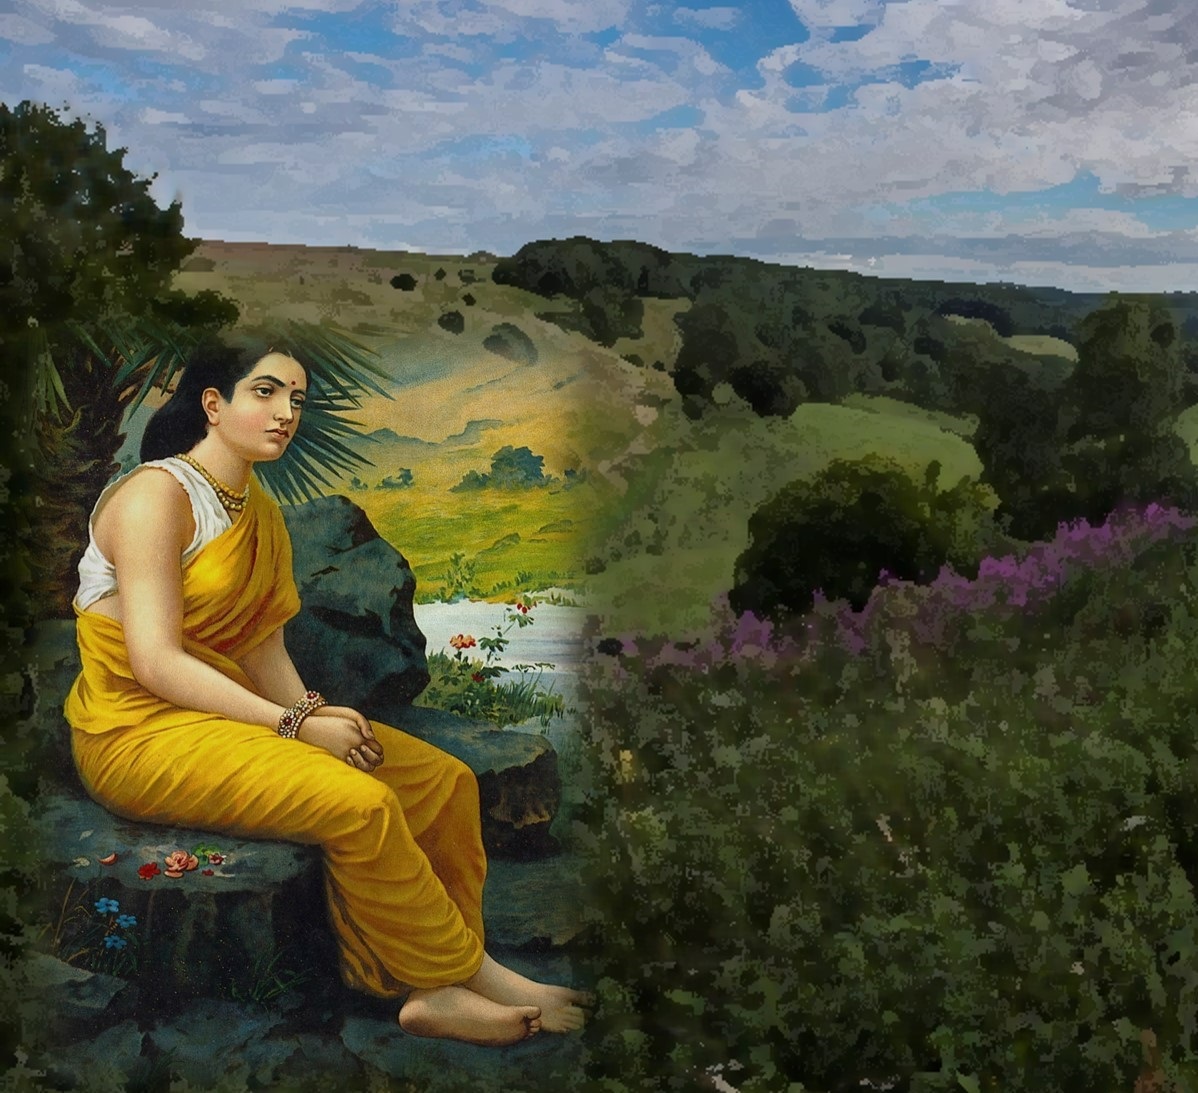 why mata sita had to suffer and face all hardships in her human avtar